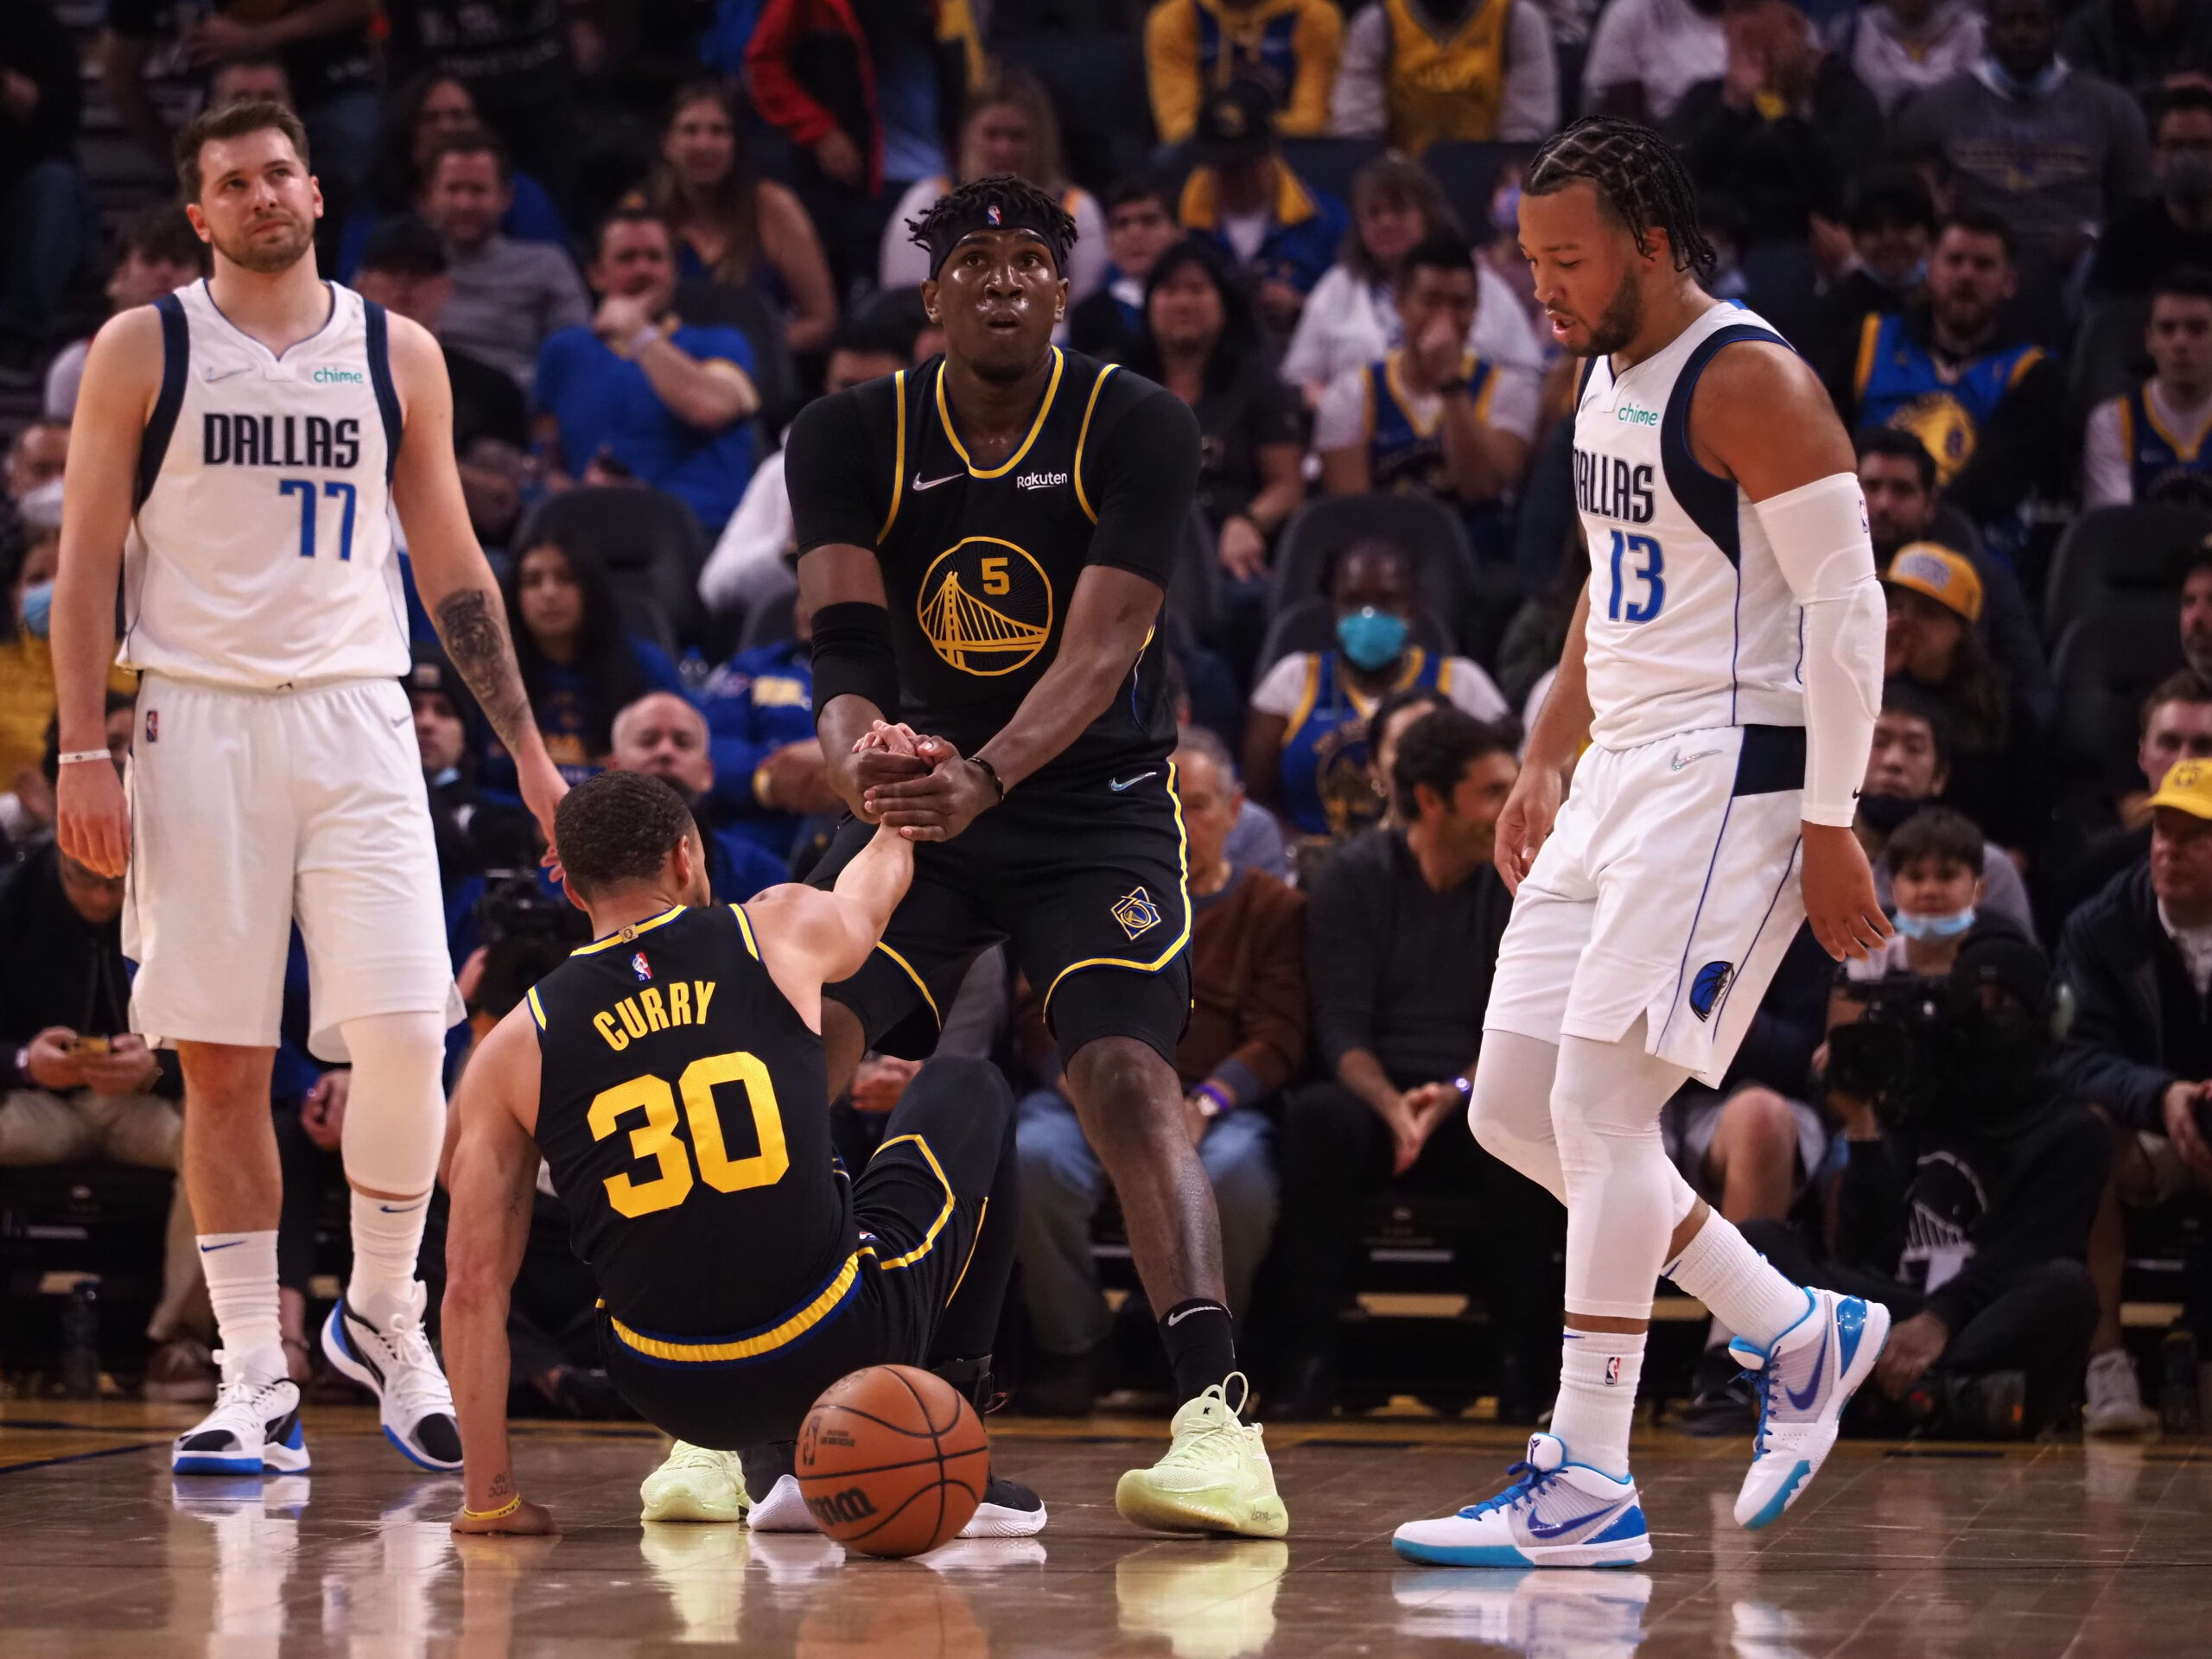 NBA Twitter reacts to Warriors blowing 21 point lead on way to ugly loss vs. Mavs